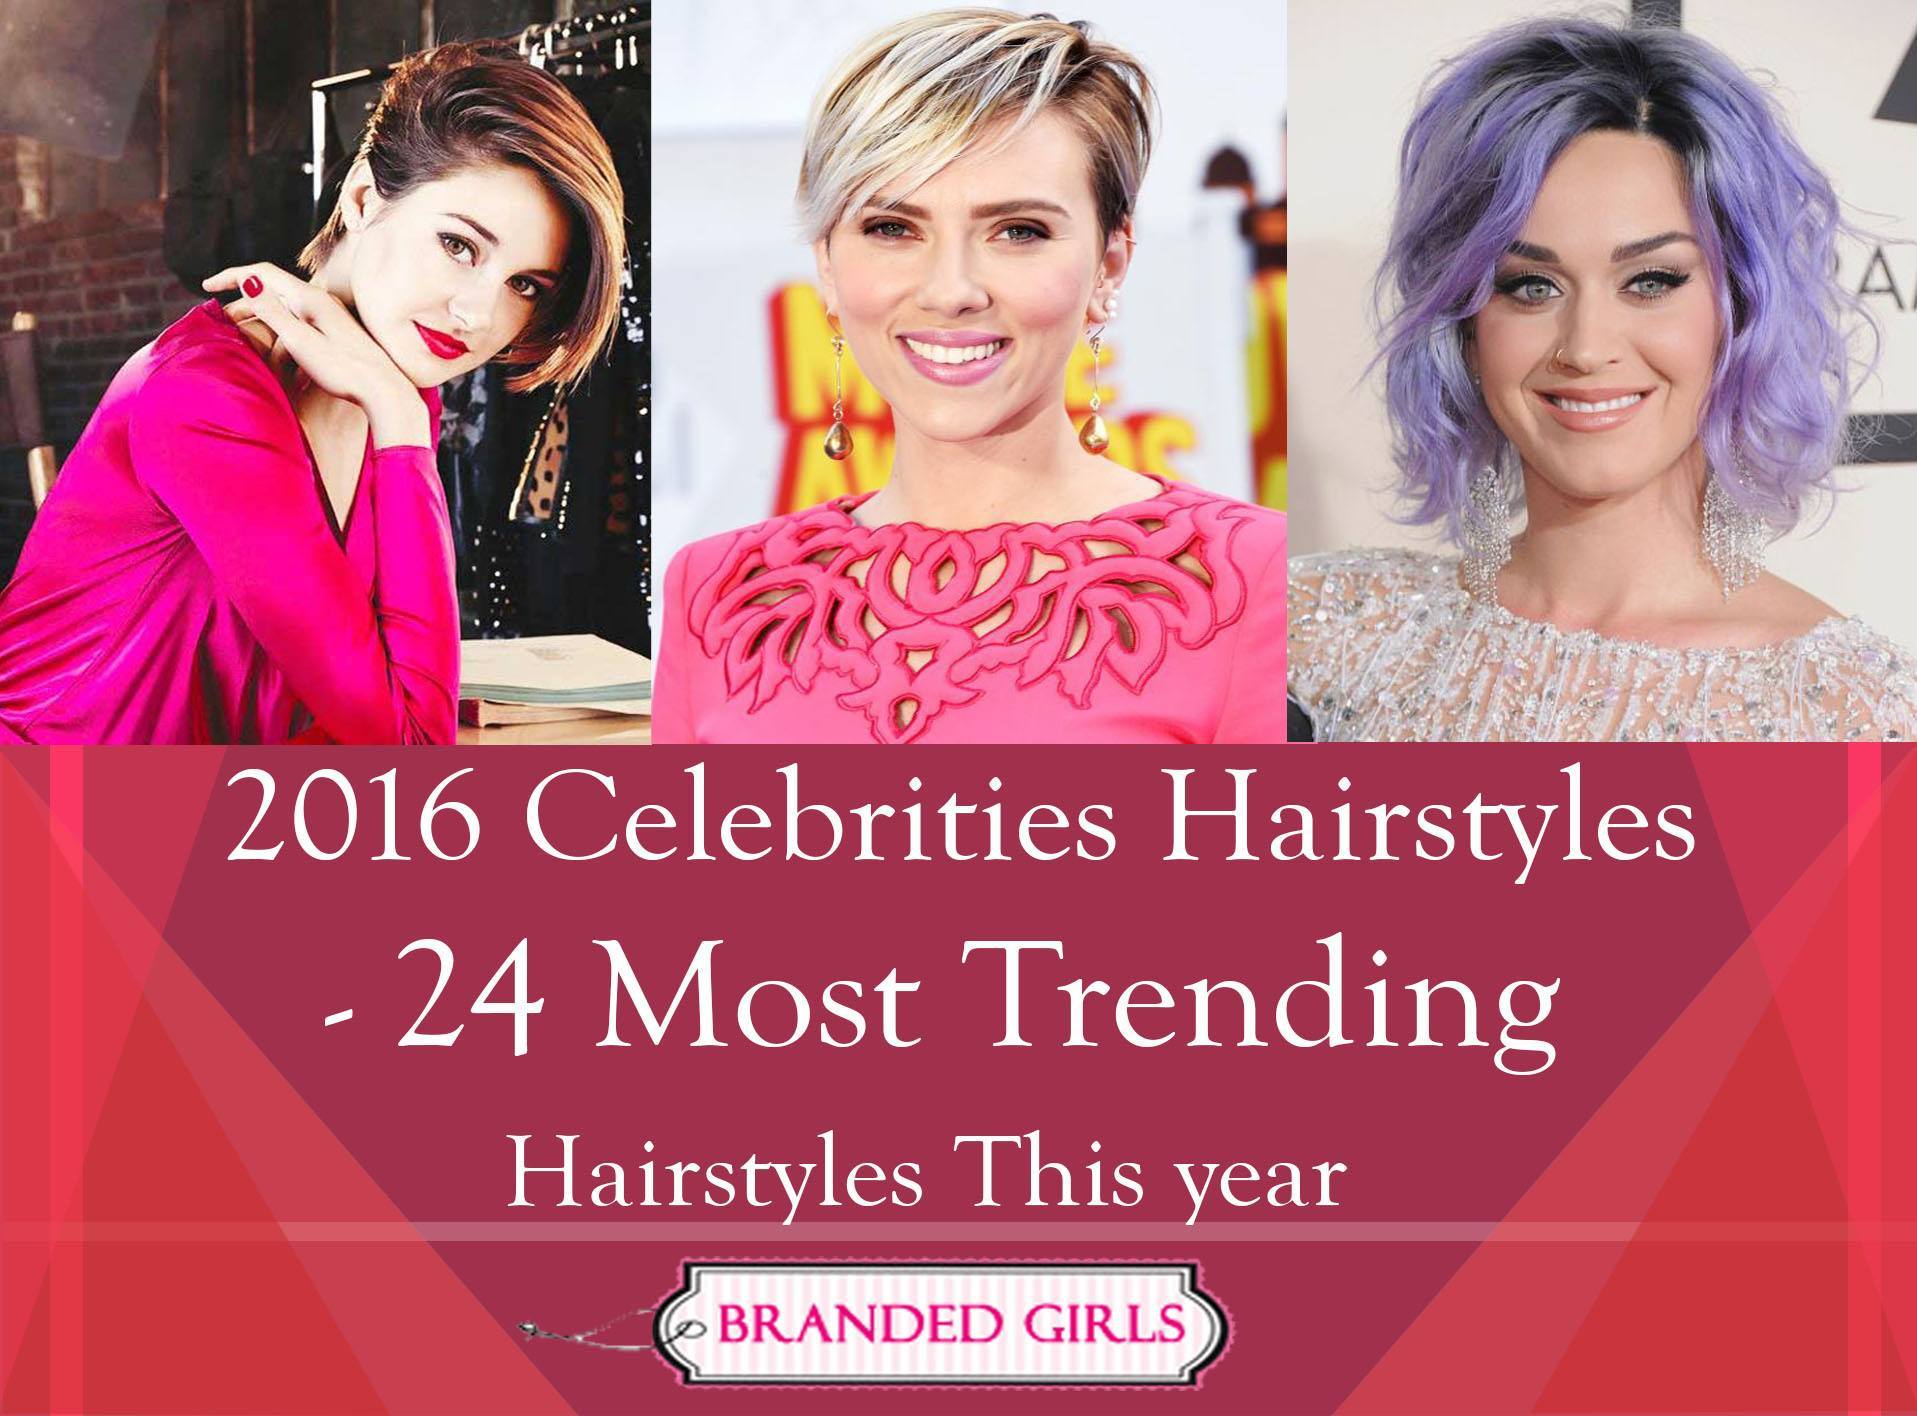 Celebrities Hairstyle: 24 Most Trending Hairstyles This Year